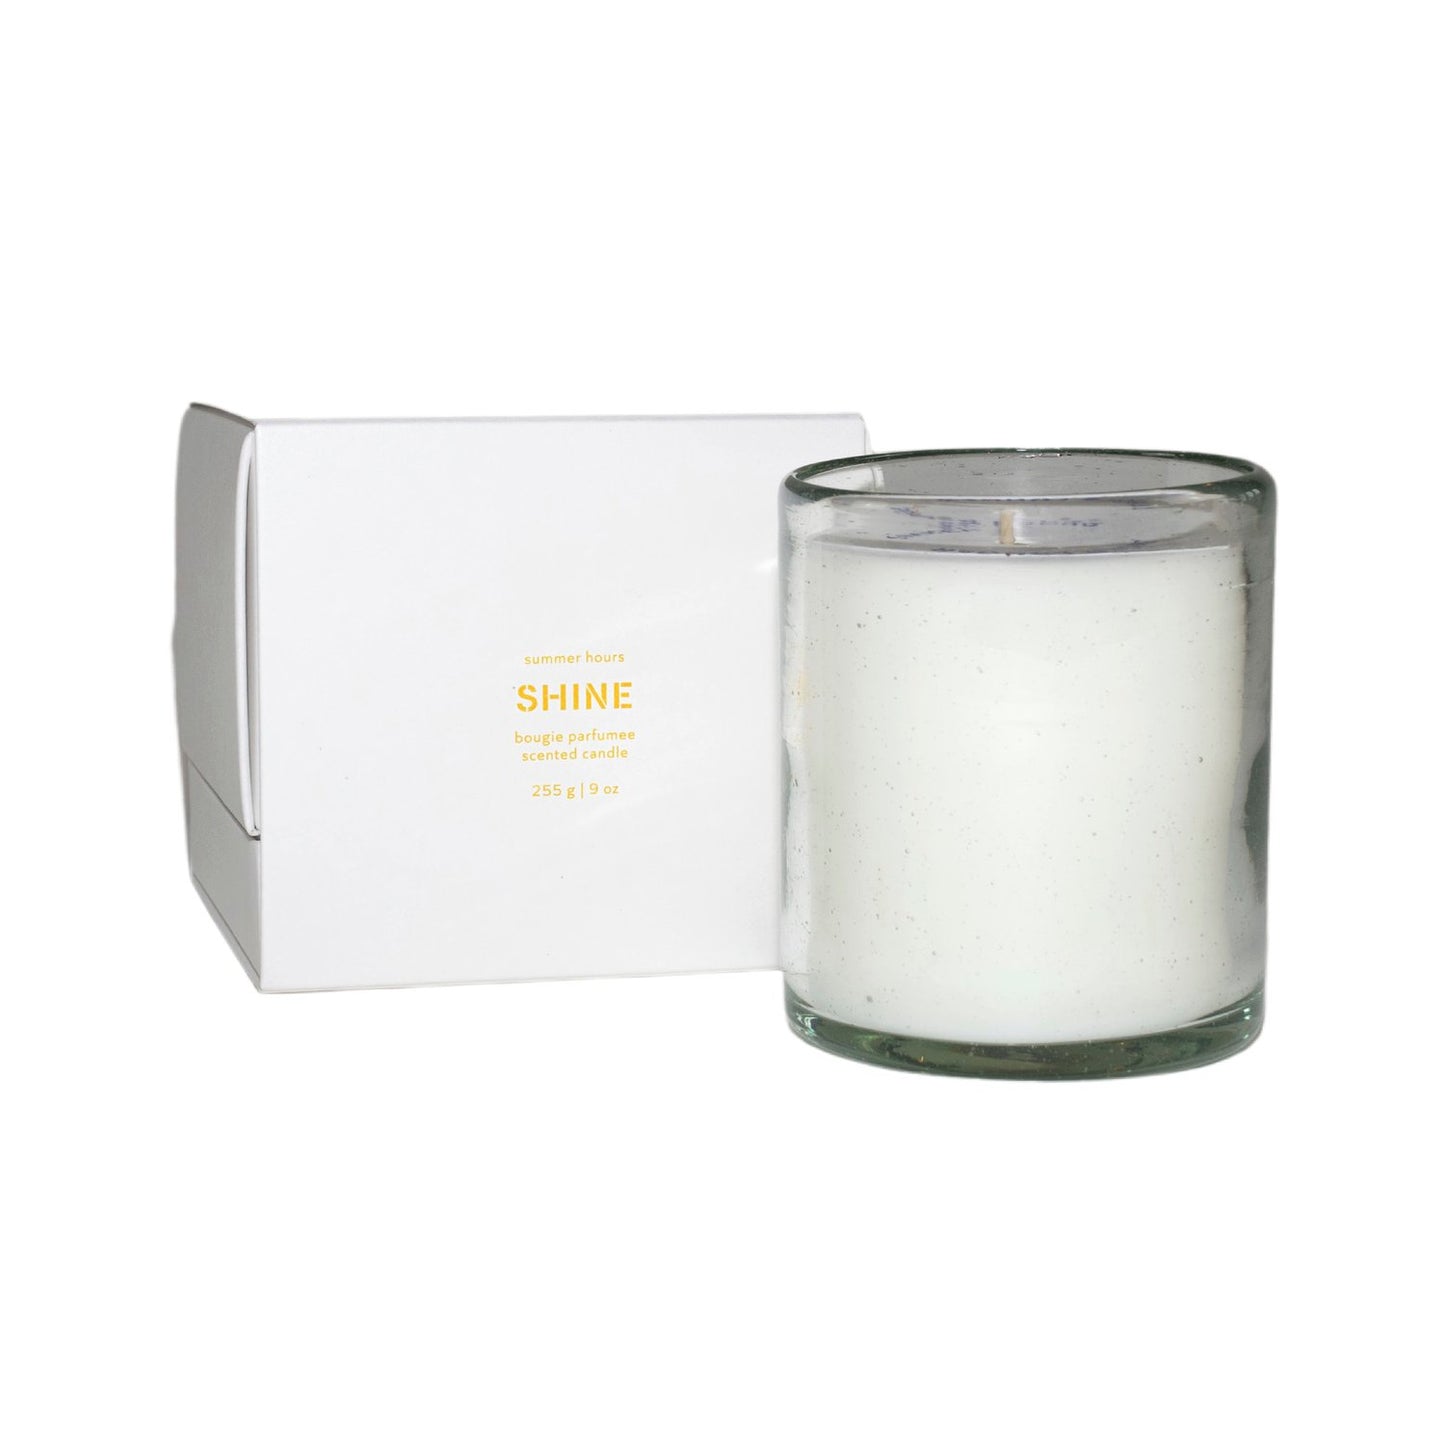 Summer Hours: Shine Degrees Candle